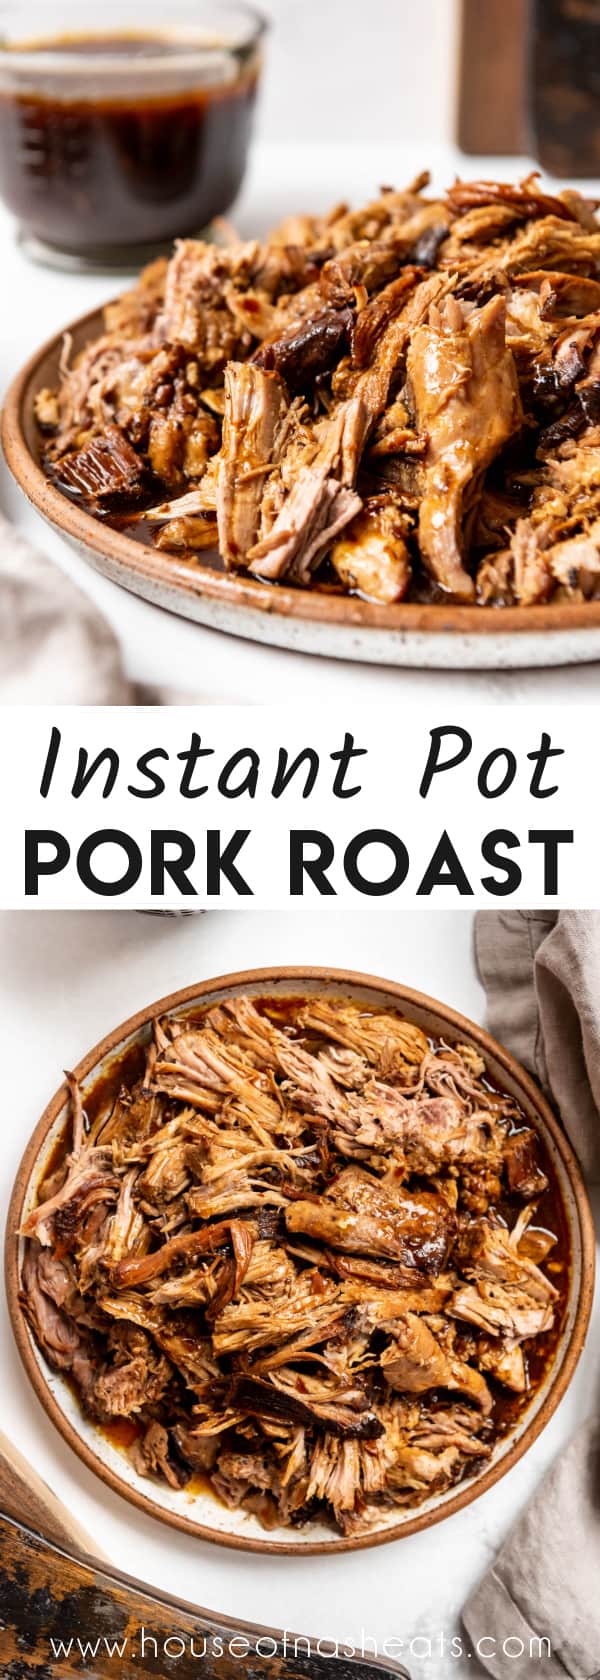 A collage of images of instant pot pork roast with text overlay.